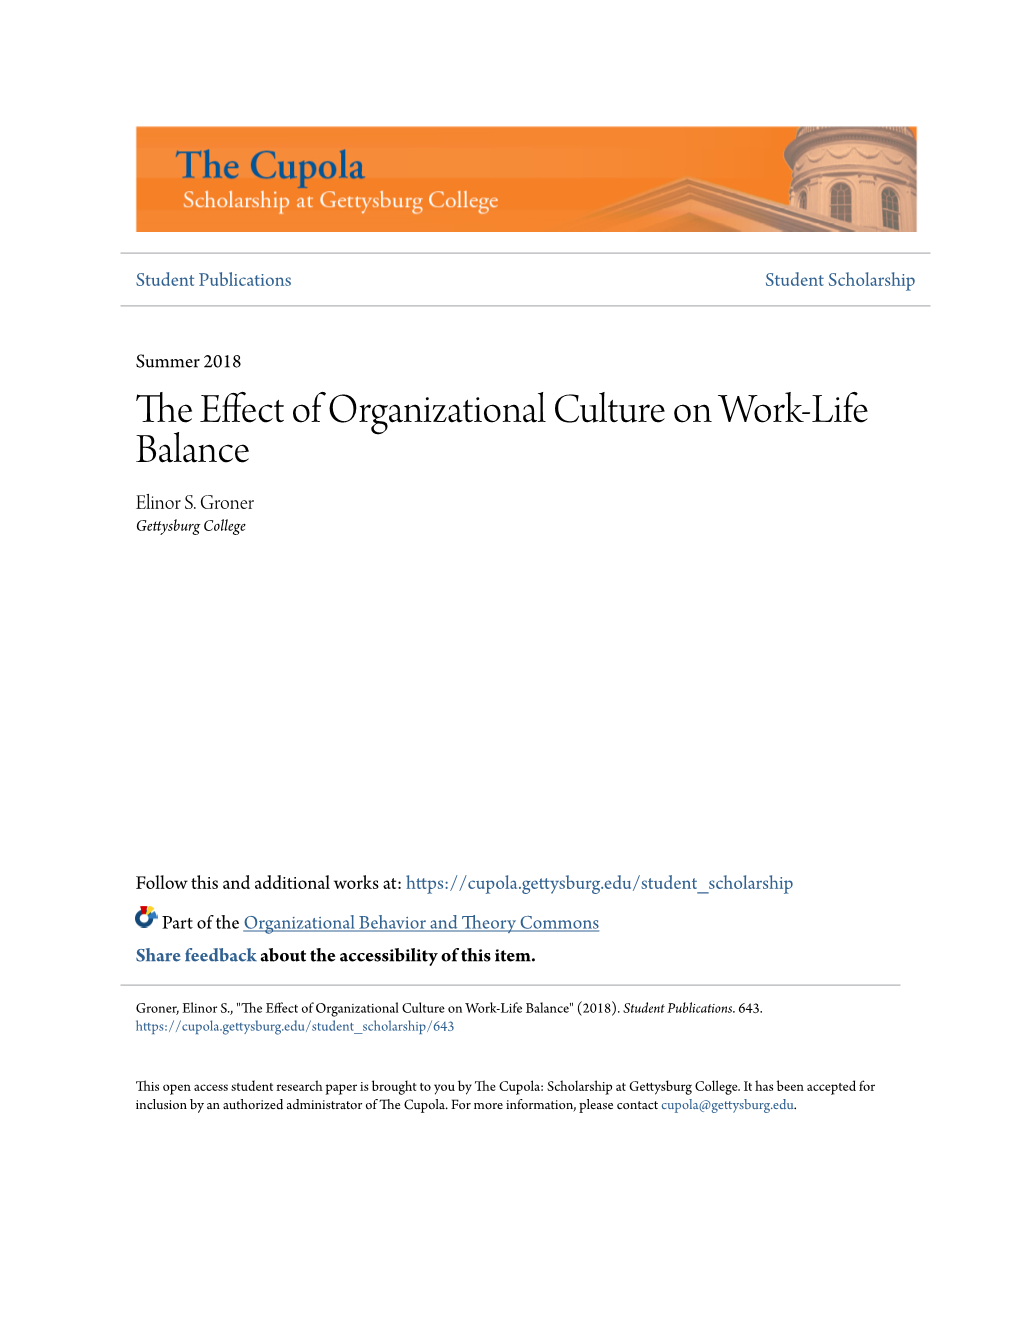 The Effect of Organizational Culture on Work-Life Balance" (2018)